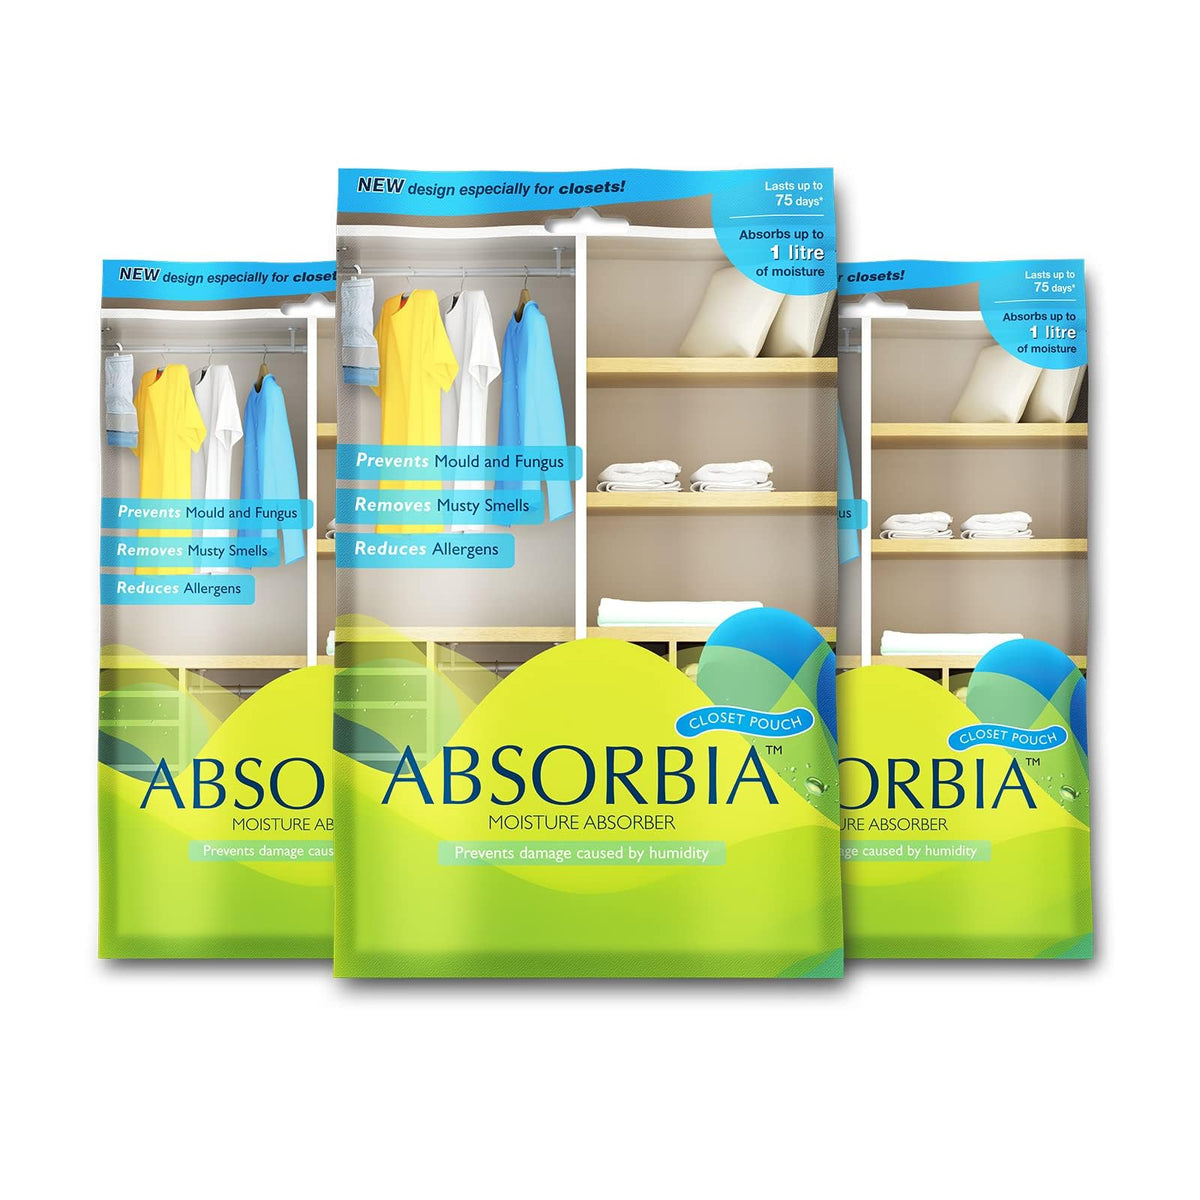 Absorbia Moisture Absorber| Absorbia Hanging Pouch - Family Pack of 9 (880ml Each) | Dehumidifier for Wardrobe, Closet and Bathroom| Fights Against Moisture, Mould, Fungus Musty Smells…